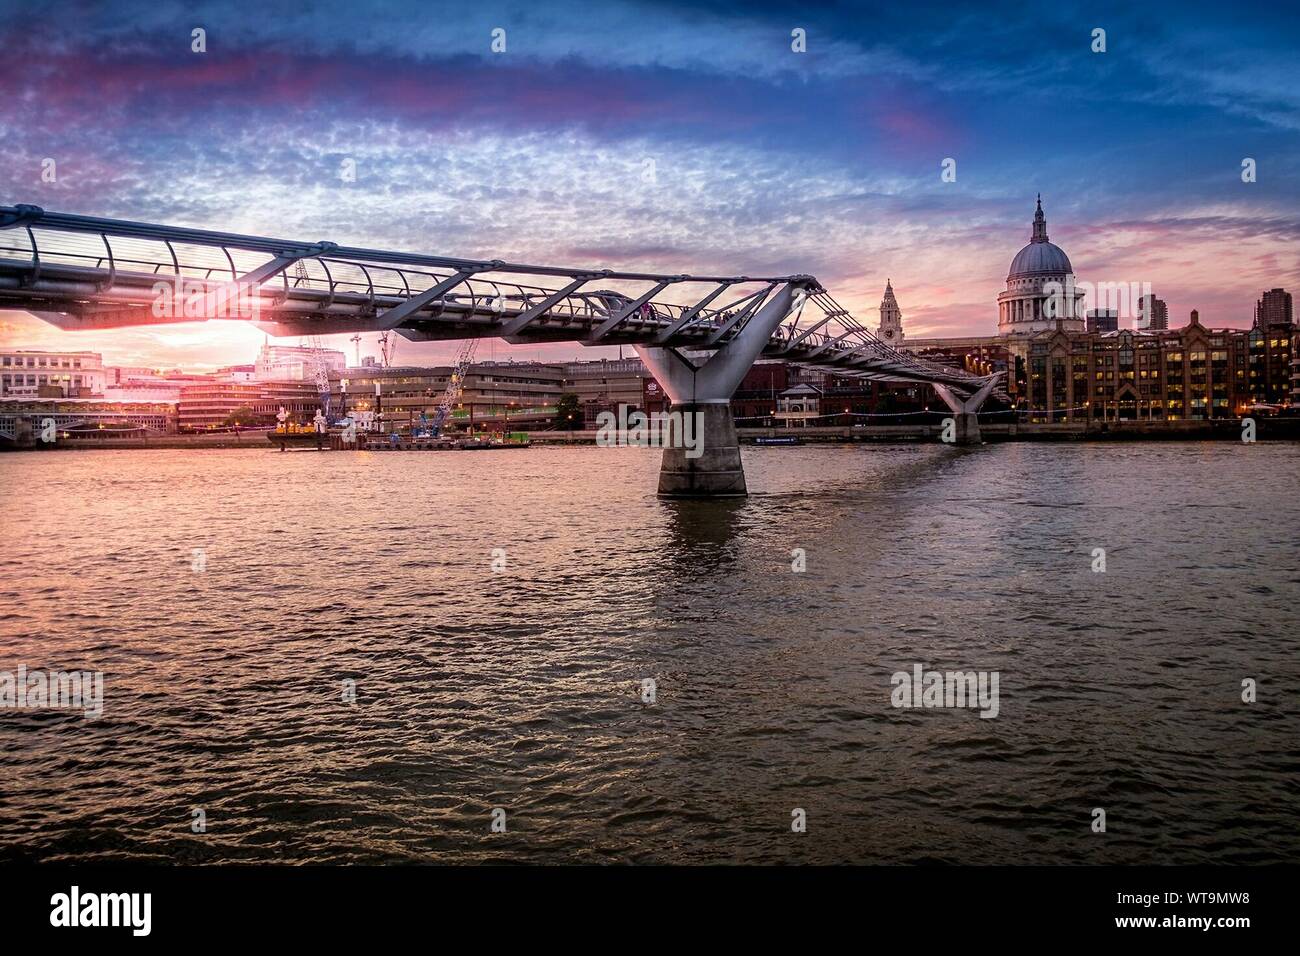 Millennium Bridge Over River Thames By St Pauls Cathedral Against Sky At Sunset Stock Photo